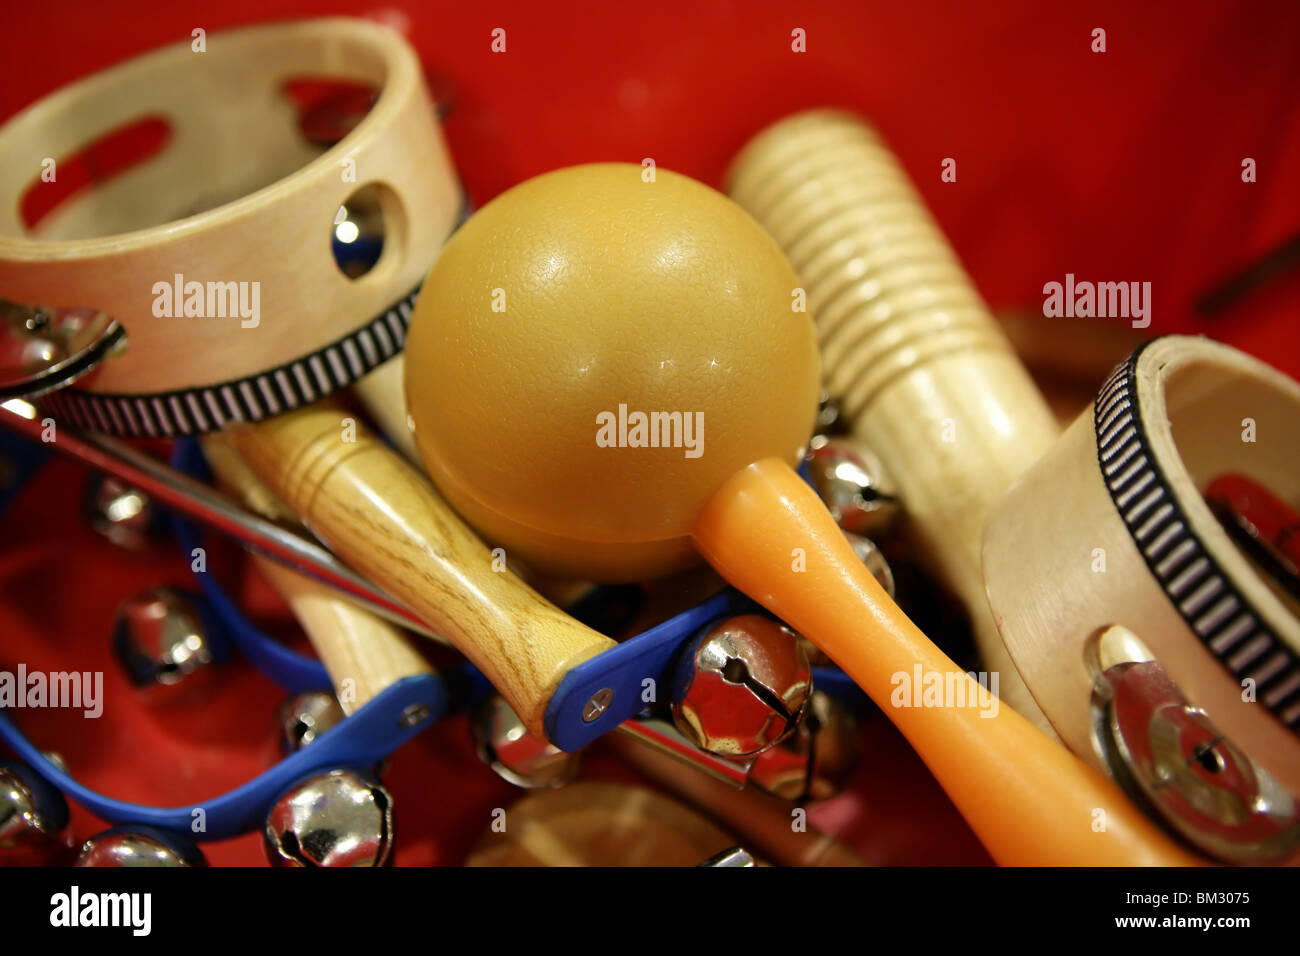 mixed percussion toy instruments over red background Stock Photo